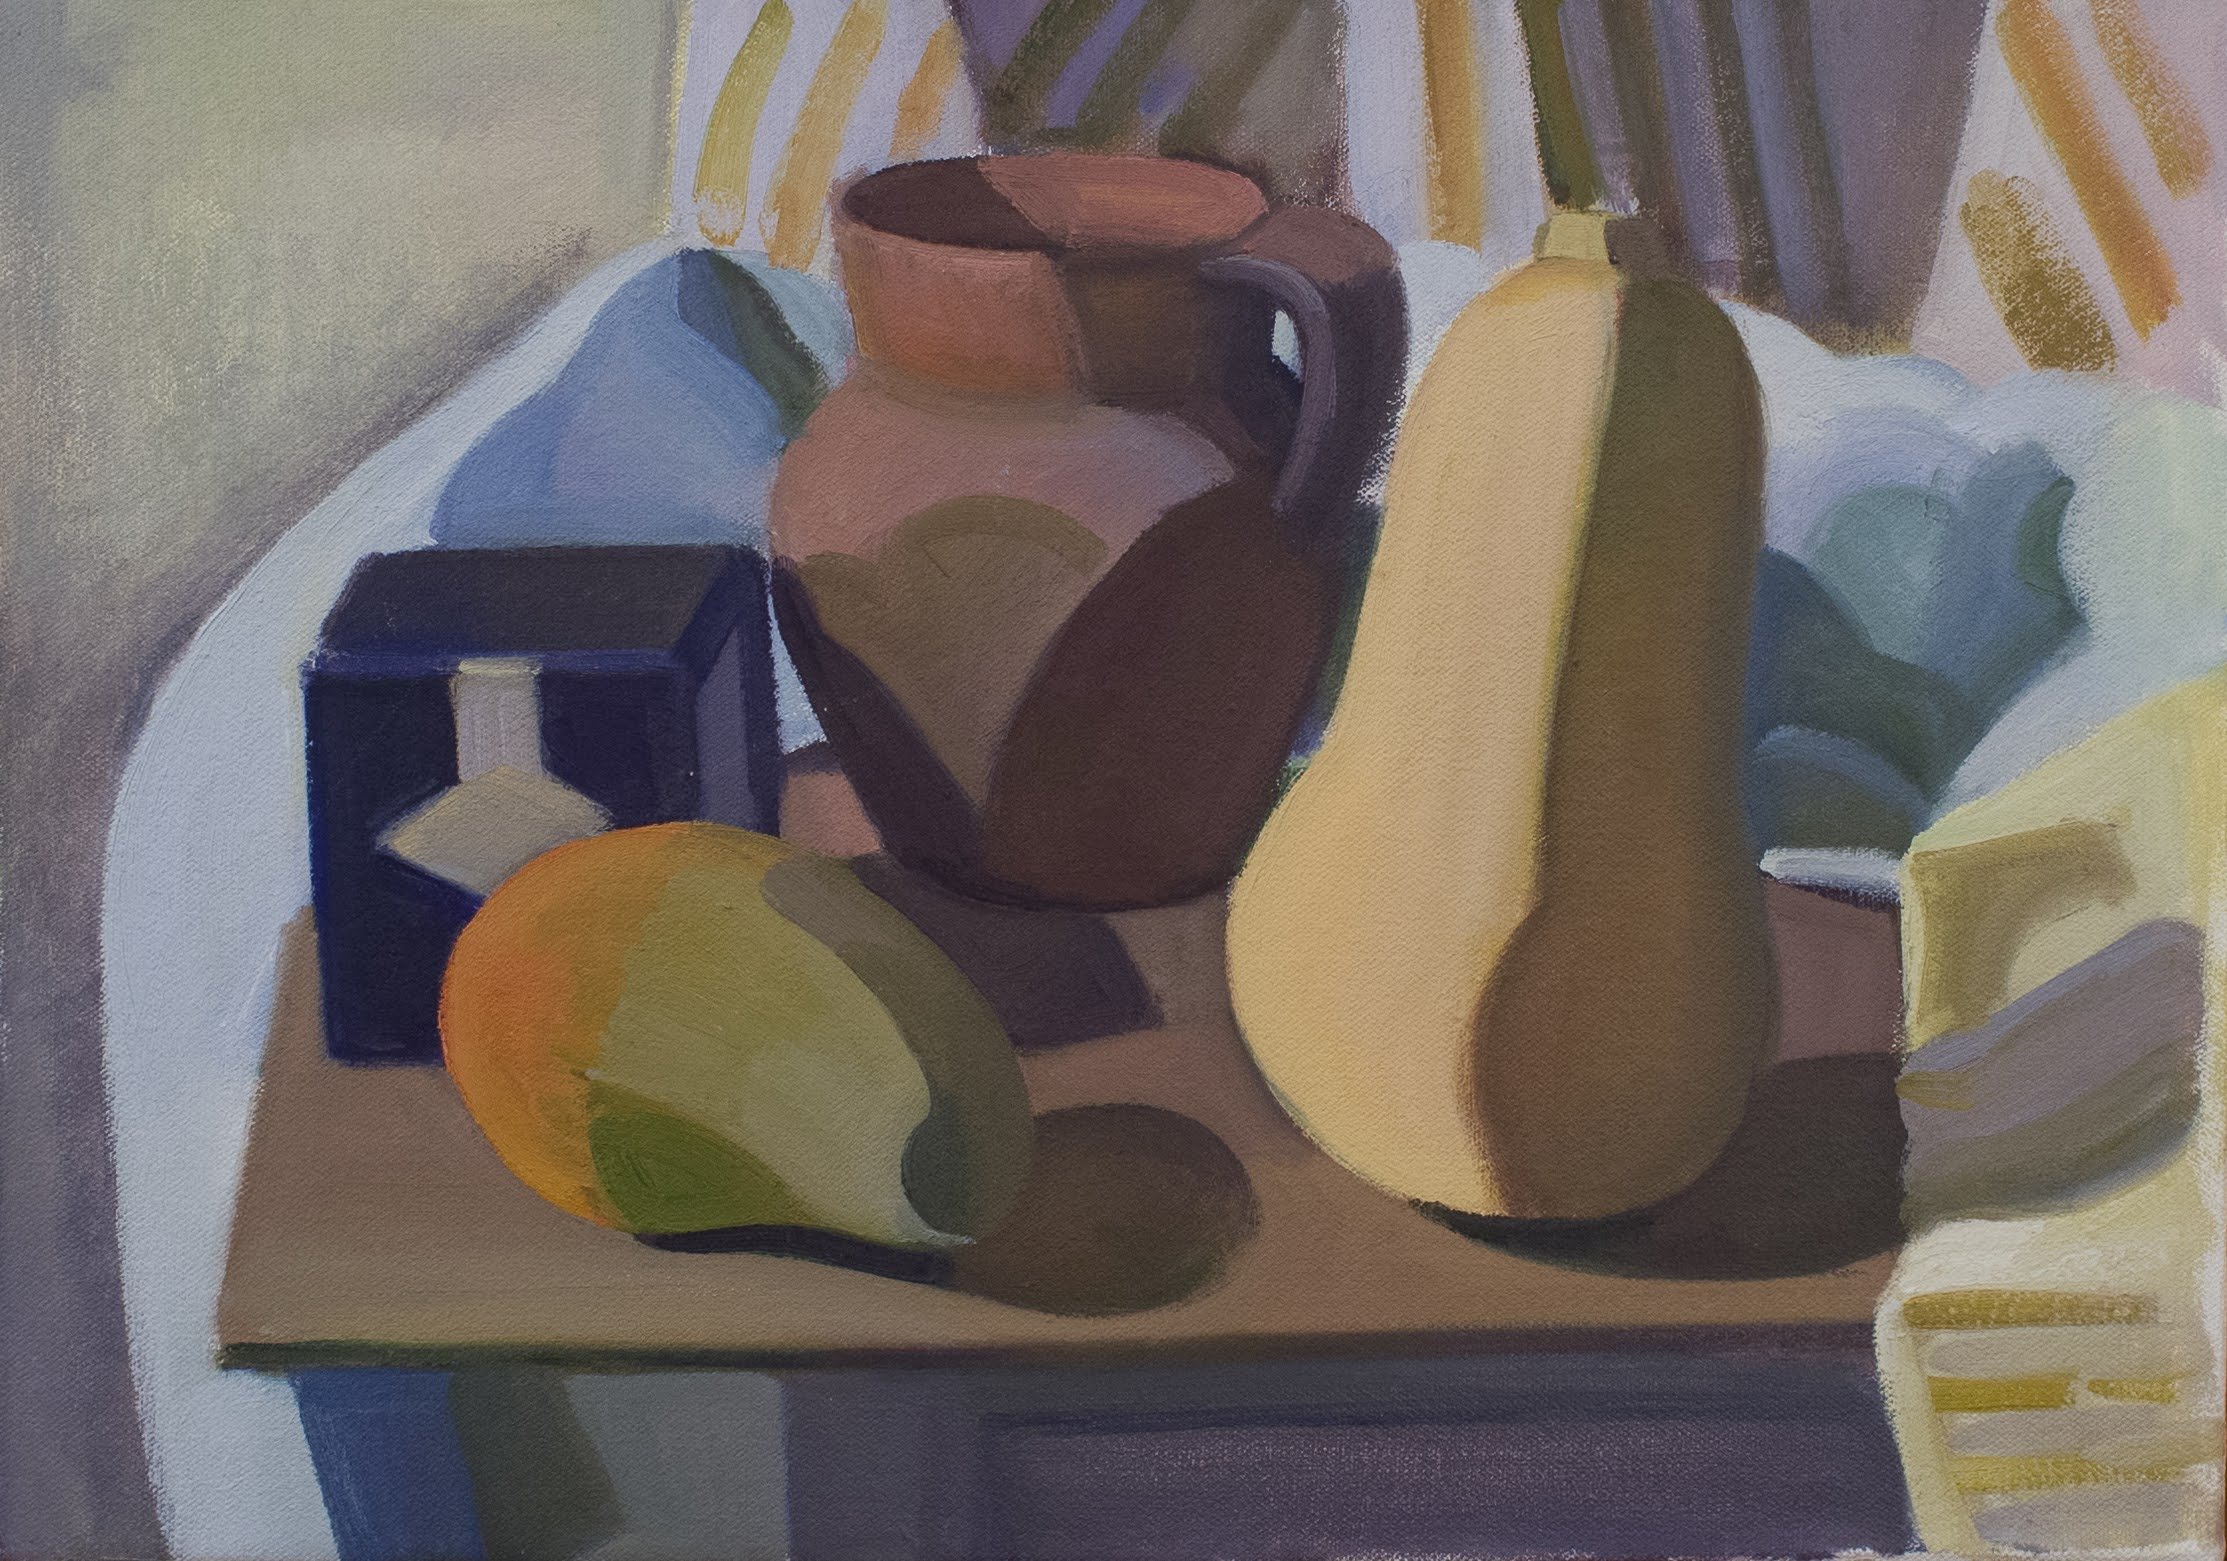   Squash, Tea Can and Mango , 1997, oil/canvas, 12 x 17 in. (Not for sale) 